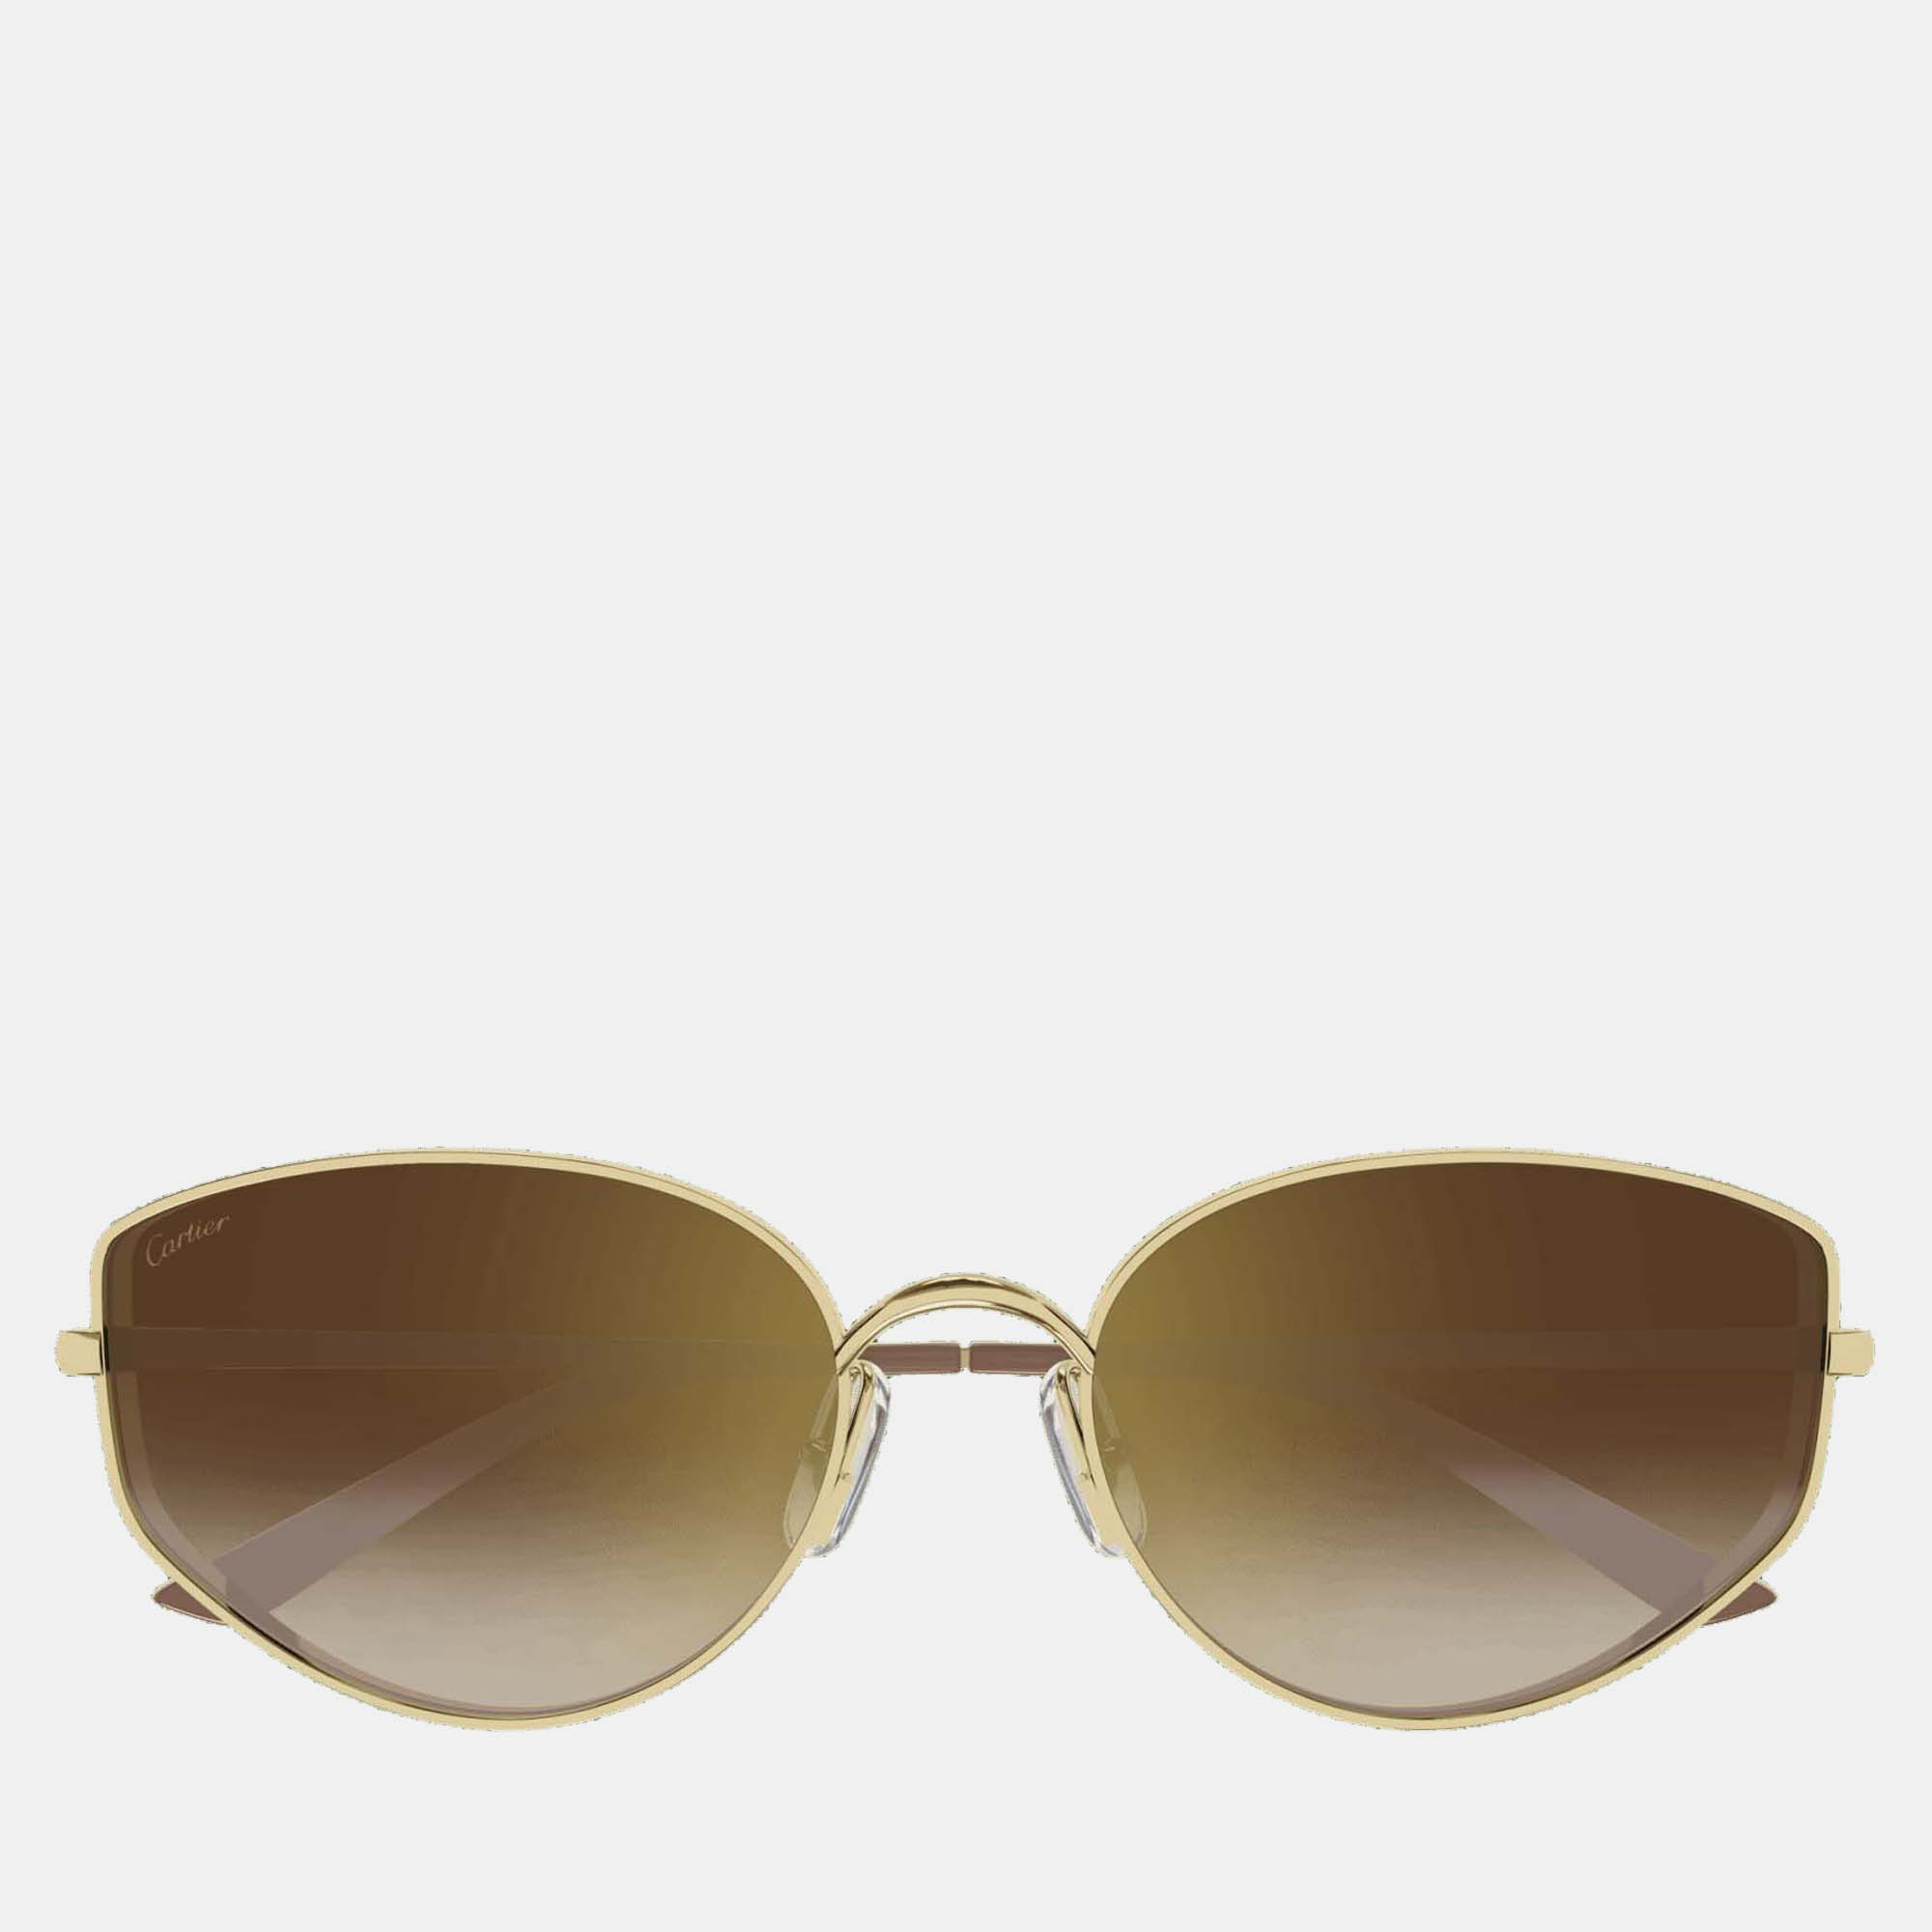 Pre-owned Cartier Gold Ct0300s-002 Cat Eye Sunglasses